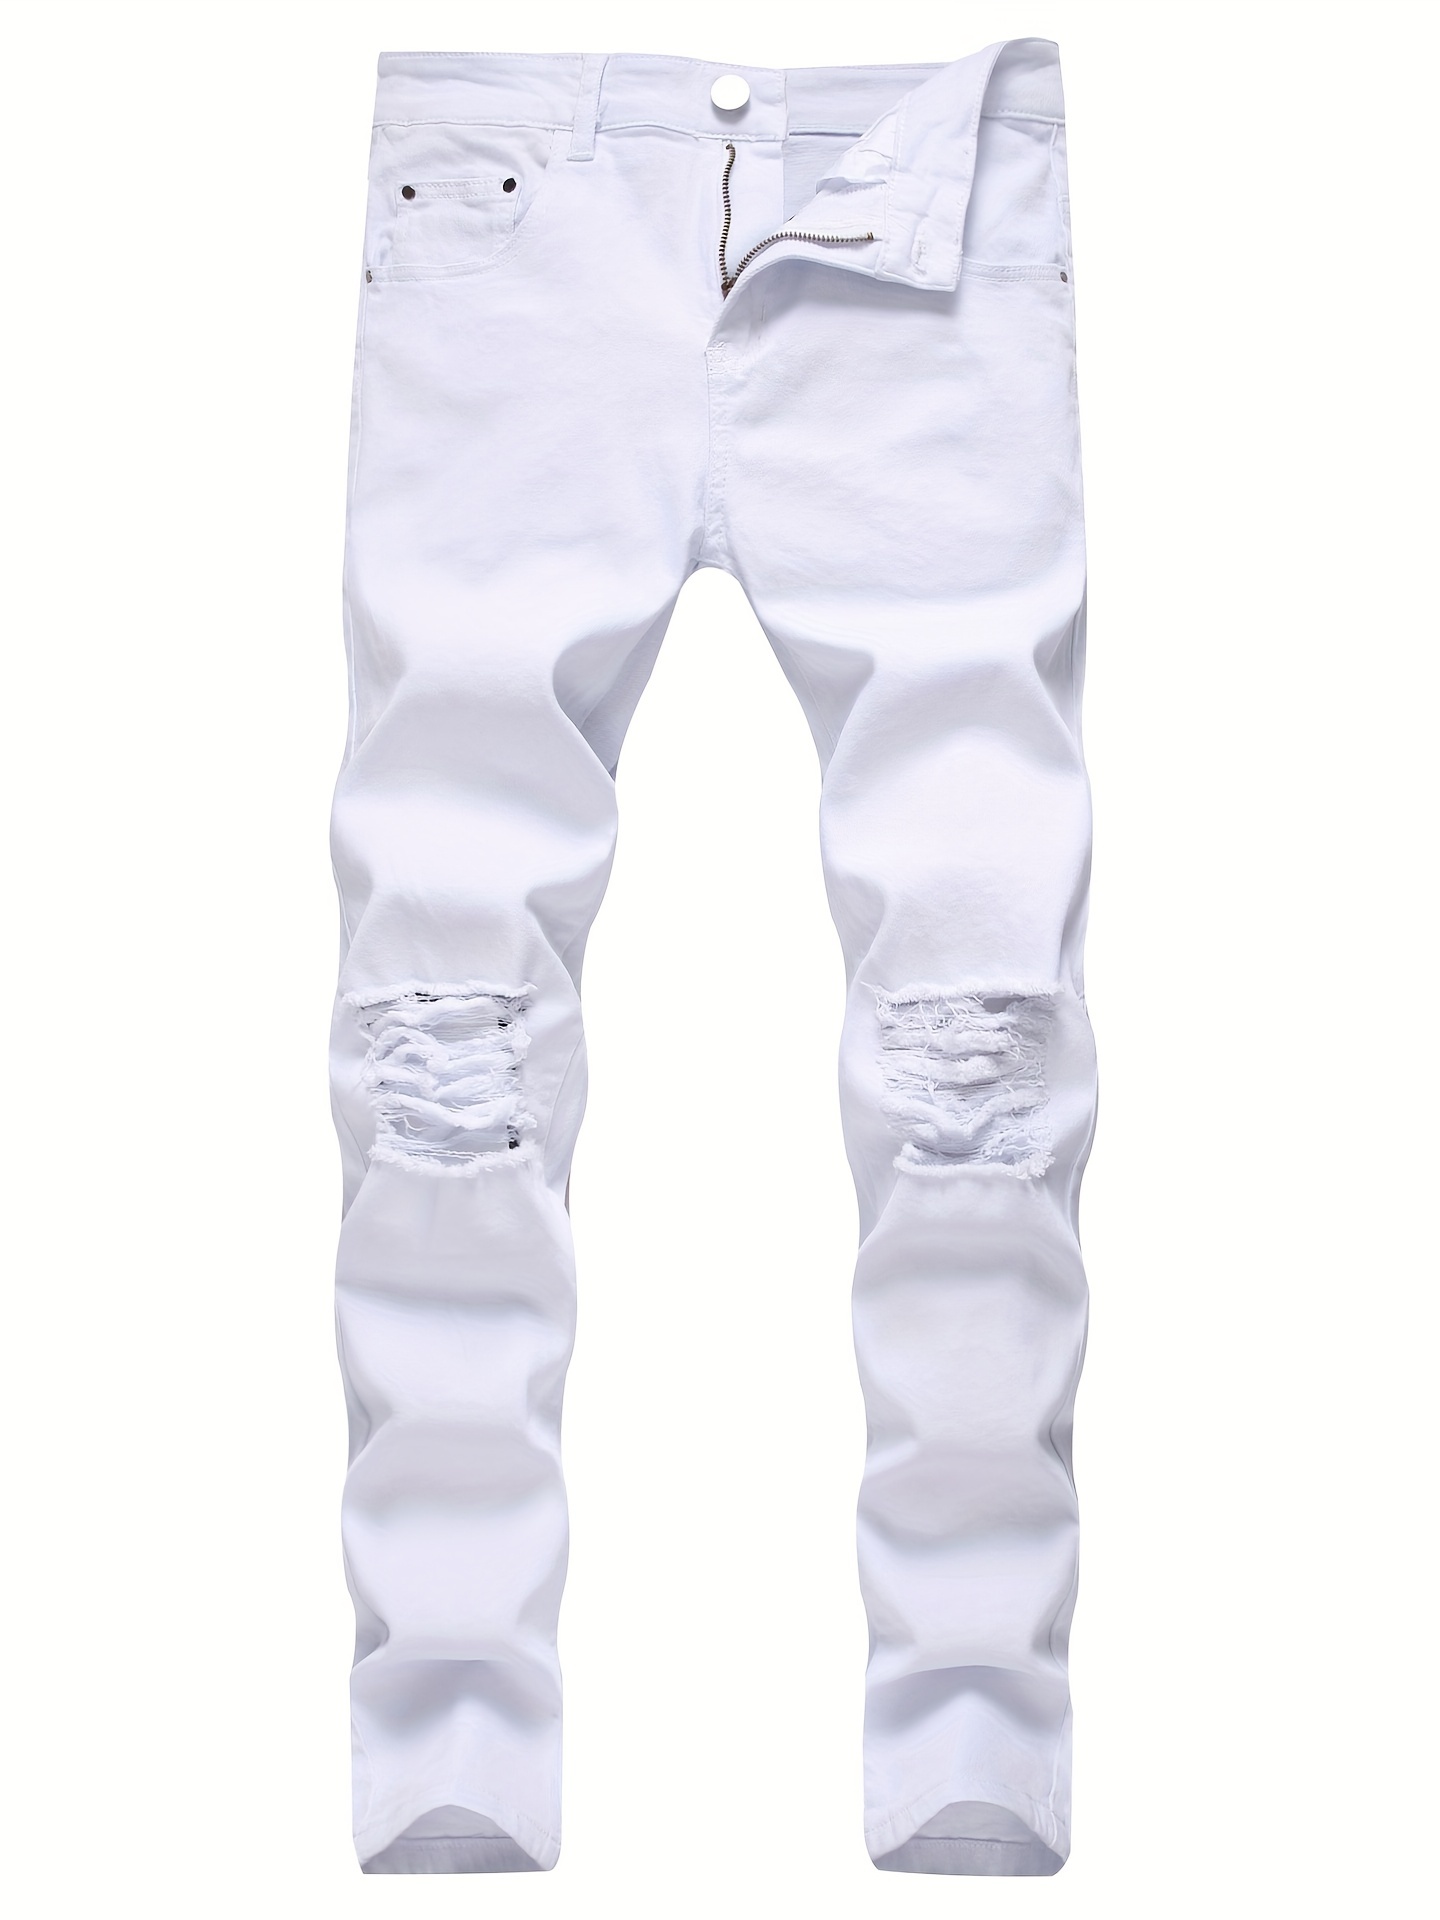 Source color brand custom ripped new style denim jeans for men on  m.